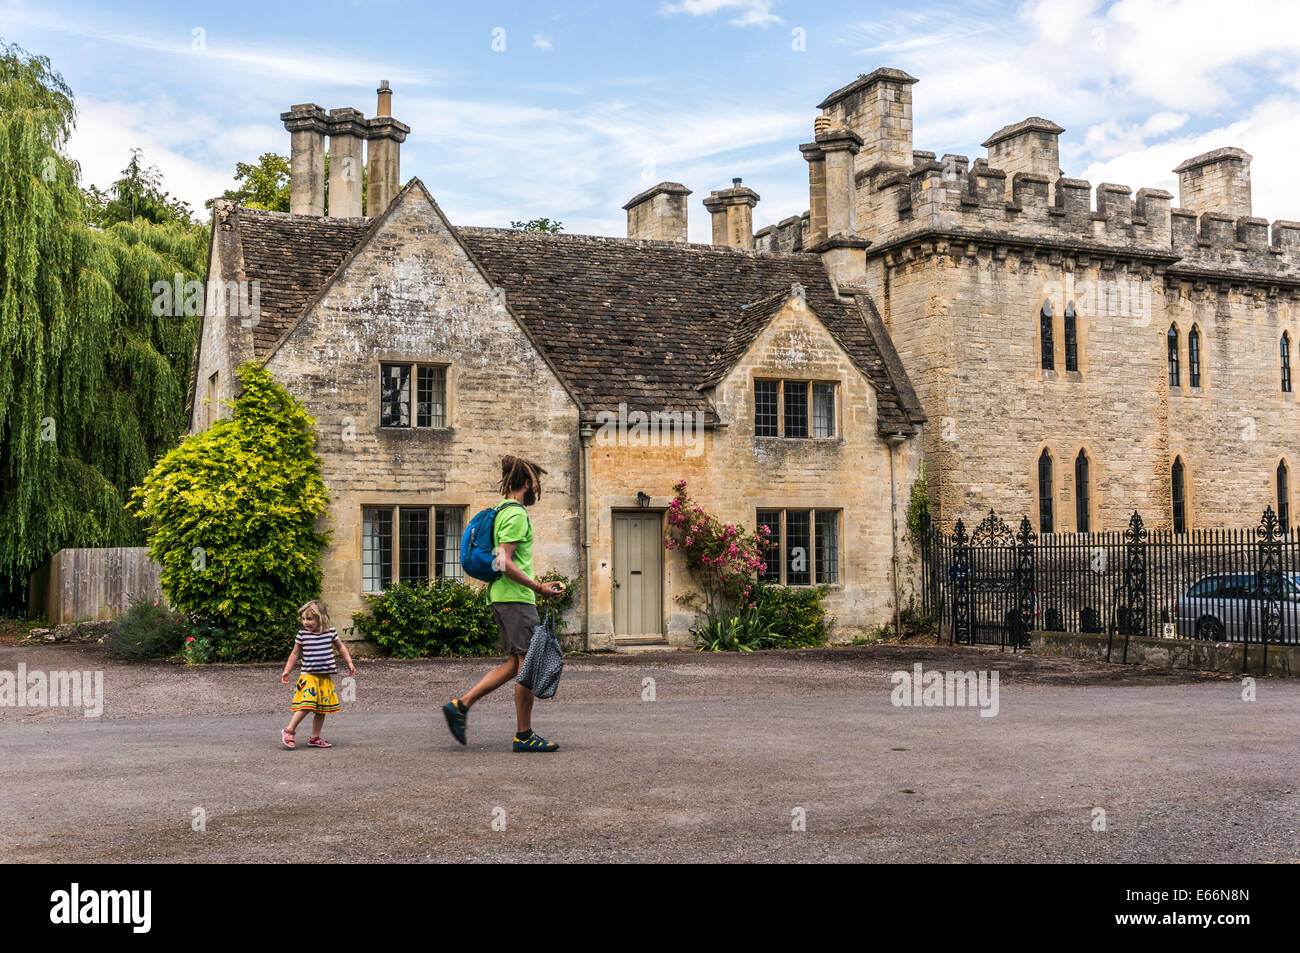 Man / father and child, walking past old house next to Cecily Hill barracks (faux medieval castle), Cirencester Park entrance, Cotswolds, England, UK. Stock Photo